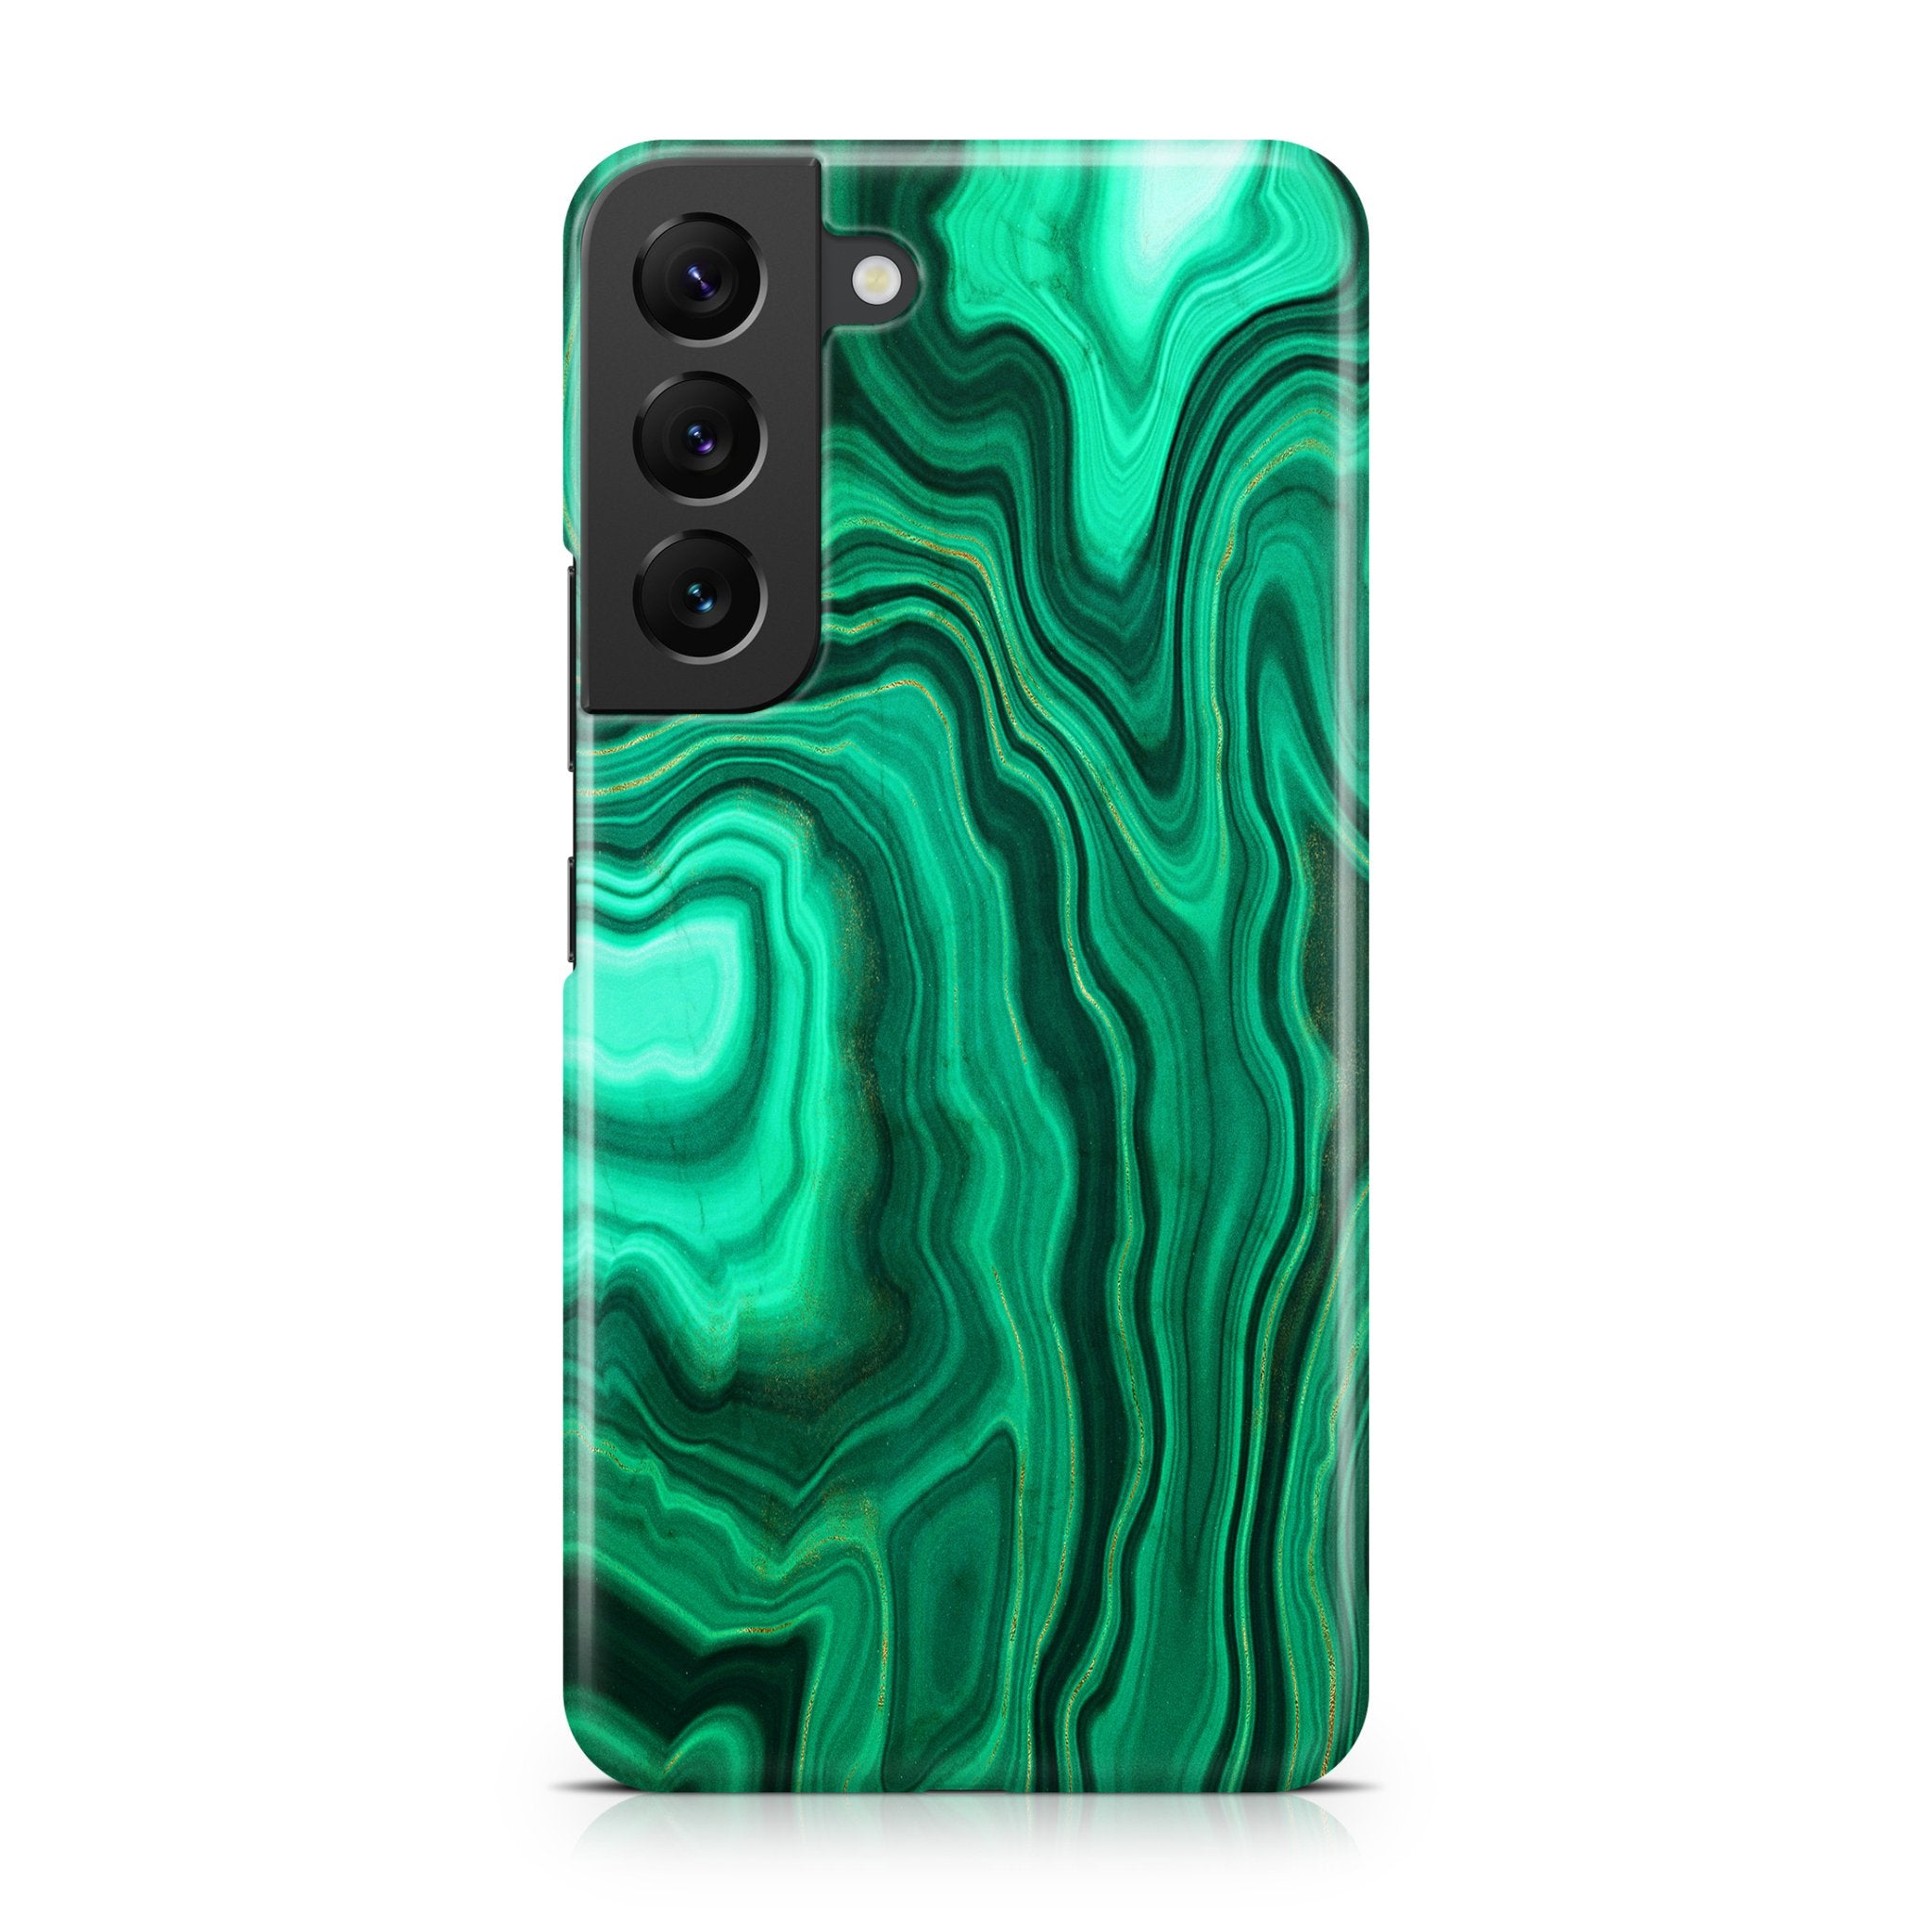 Malachite I - Samsung phone case designs by CaseSwagger